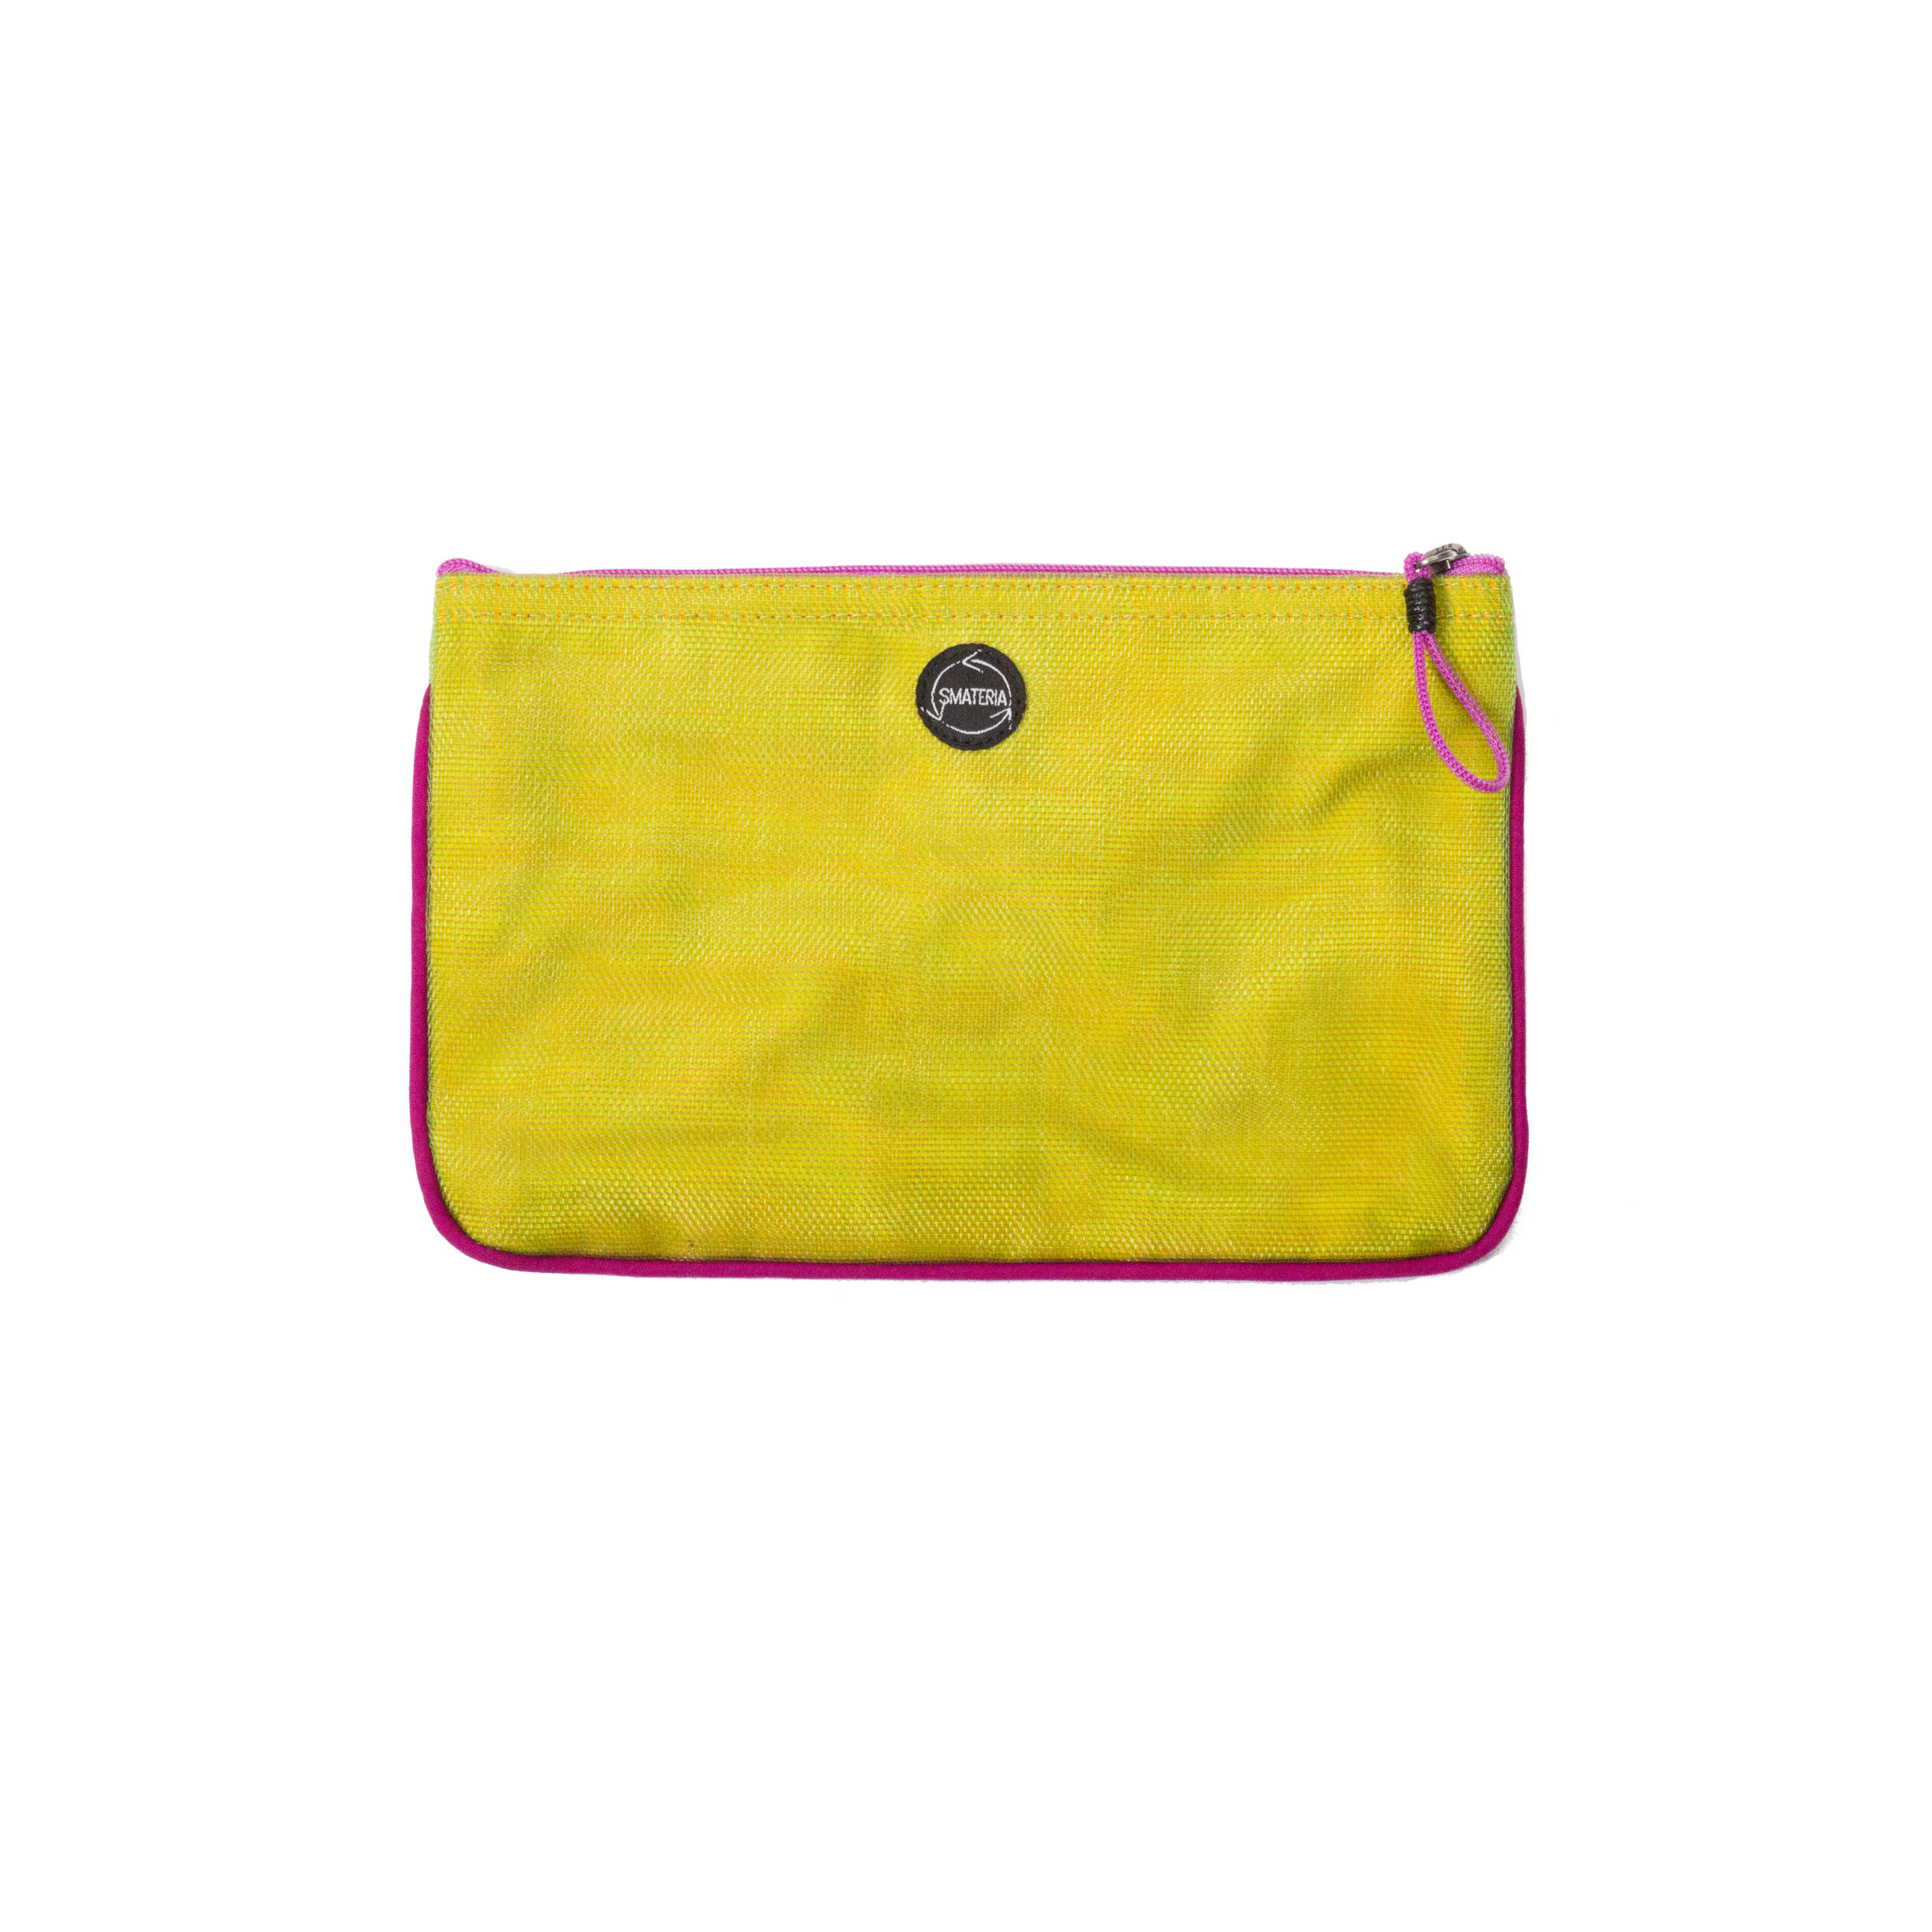 Express - Ethical Multifunctional Case - Yellow And Pink